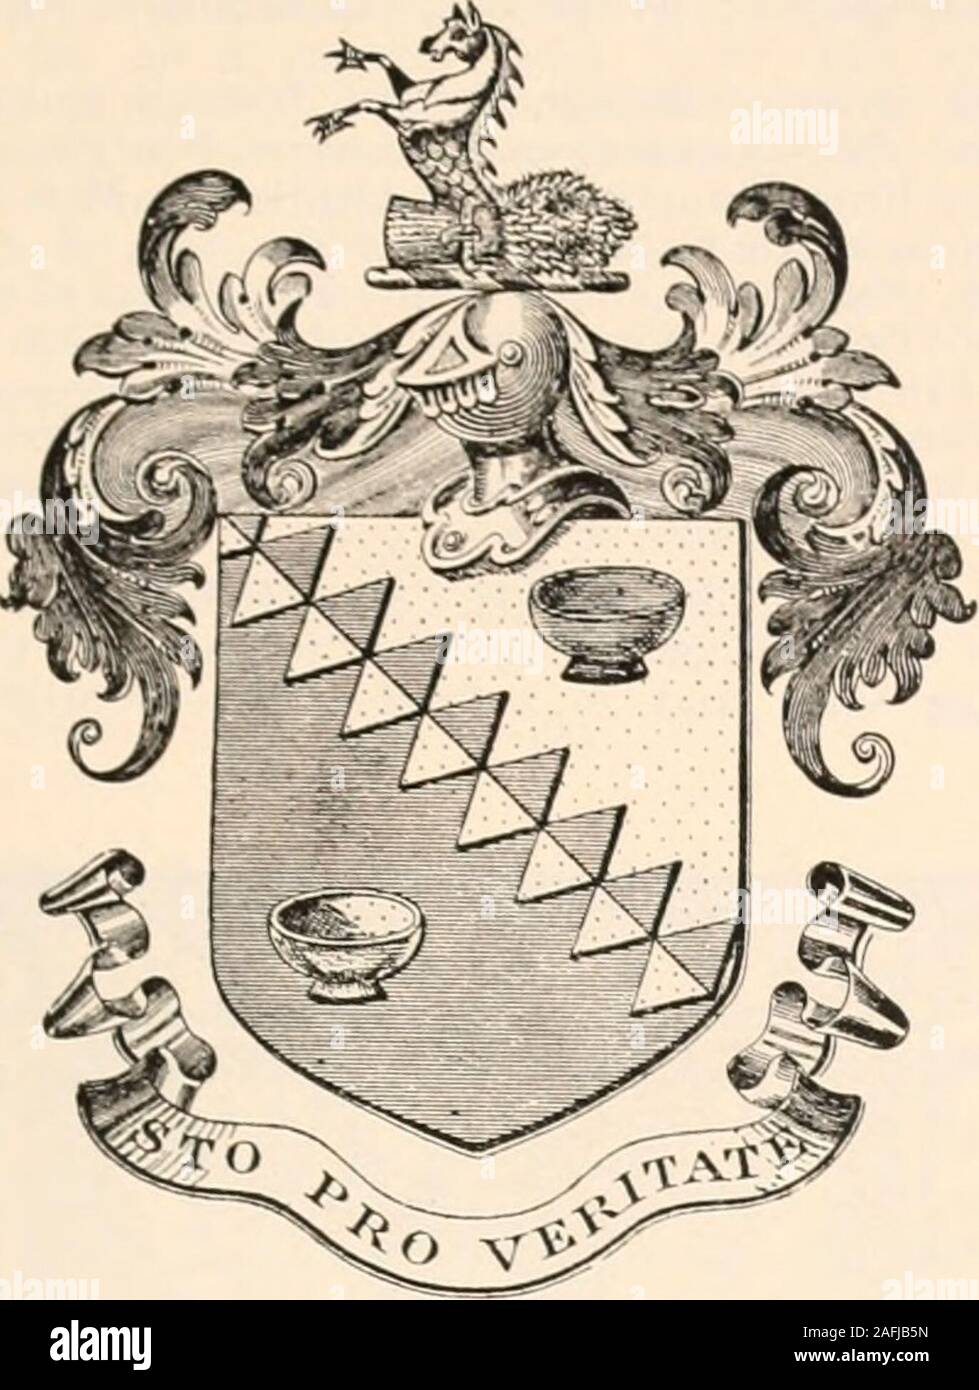 . Armorial families : a directory of gentlemen of coat-armour. collared and ringed or. Eldest son of John Boldero, Gentleman, of St. JohnsWood, and Greenford, Middx., b. 1827 ; d. 1884 ;m. 1854, Elizabeth, d. of WLUiam Howell, of Wood-stock, Oxon.:—John Boldero, Esq., J.P. East Sussex, b. 1855 ;m. 1881, Clara, d. of Thomas Arnison, of Penrith ; andhas issue—Harold Esmond Boldero, Gentleman, b. 1889[m. 1917, Margery, d. of the late Arthur Duim];Lawrence John Gale Boldero, Gentleman, b. 1891{m. 1917, Mary Laffery] ; Gladys Maud Bohun; andWinifred Selma. Res.—Frankham, Mark Cross, Sussex. BOLDING Stock Photo